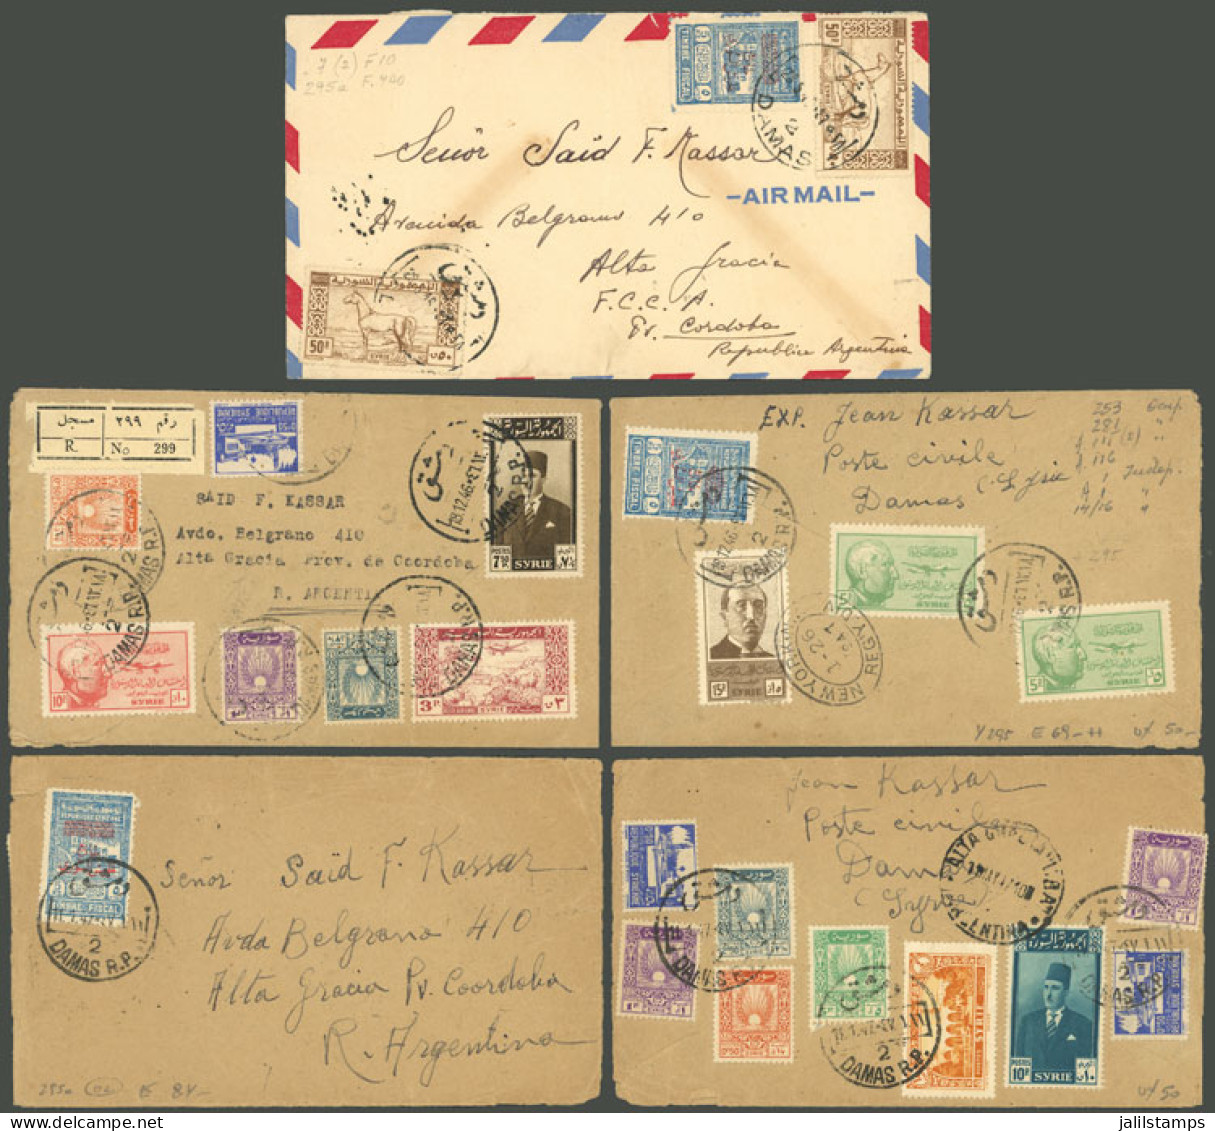 SYRIA: 3 Covers Sent To Argentina In 1946/7, Attractive Frankings, Nice Lot! - Syrien